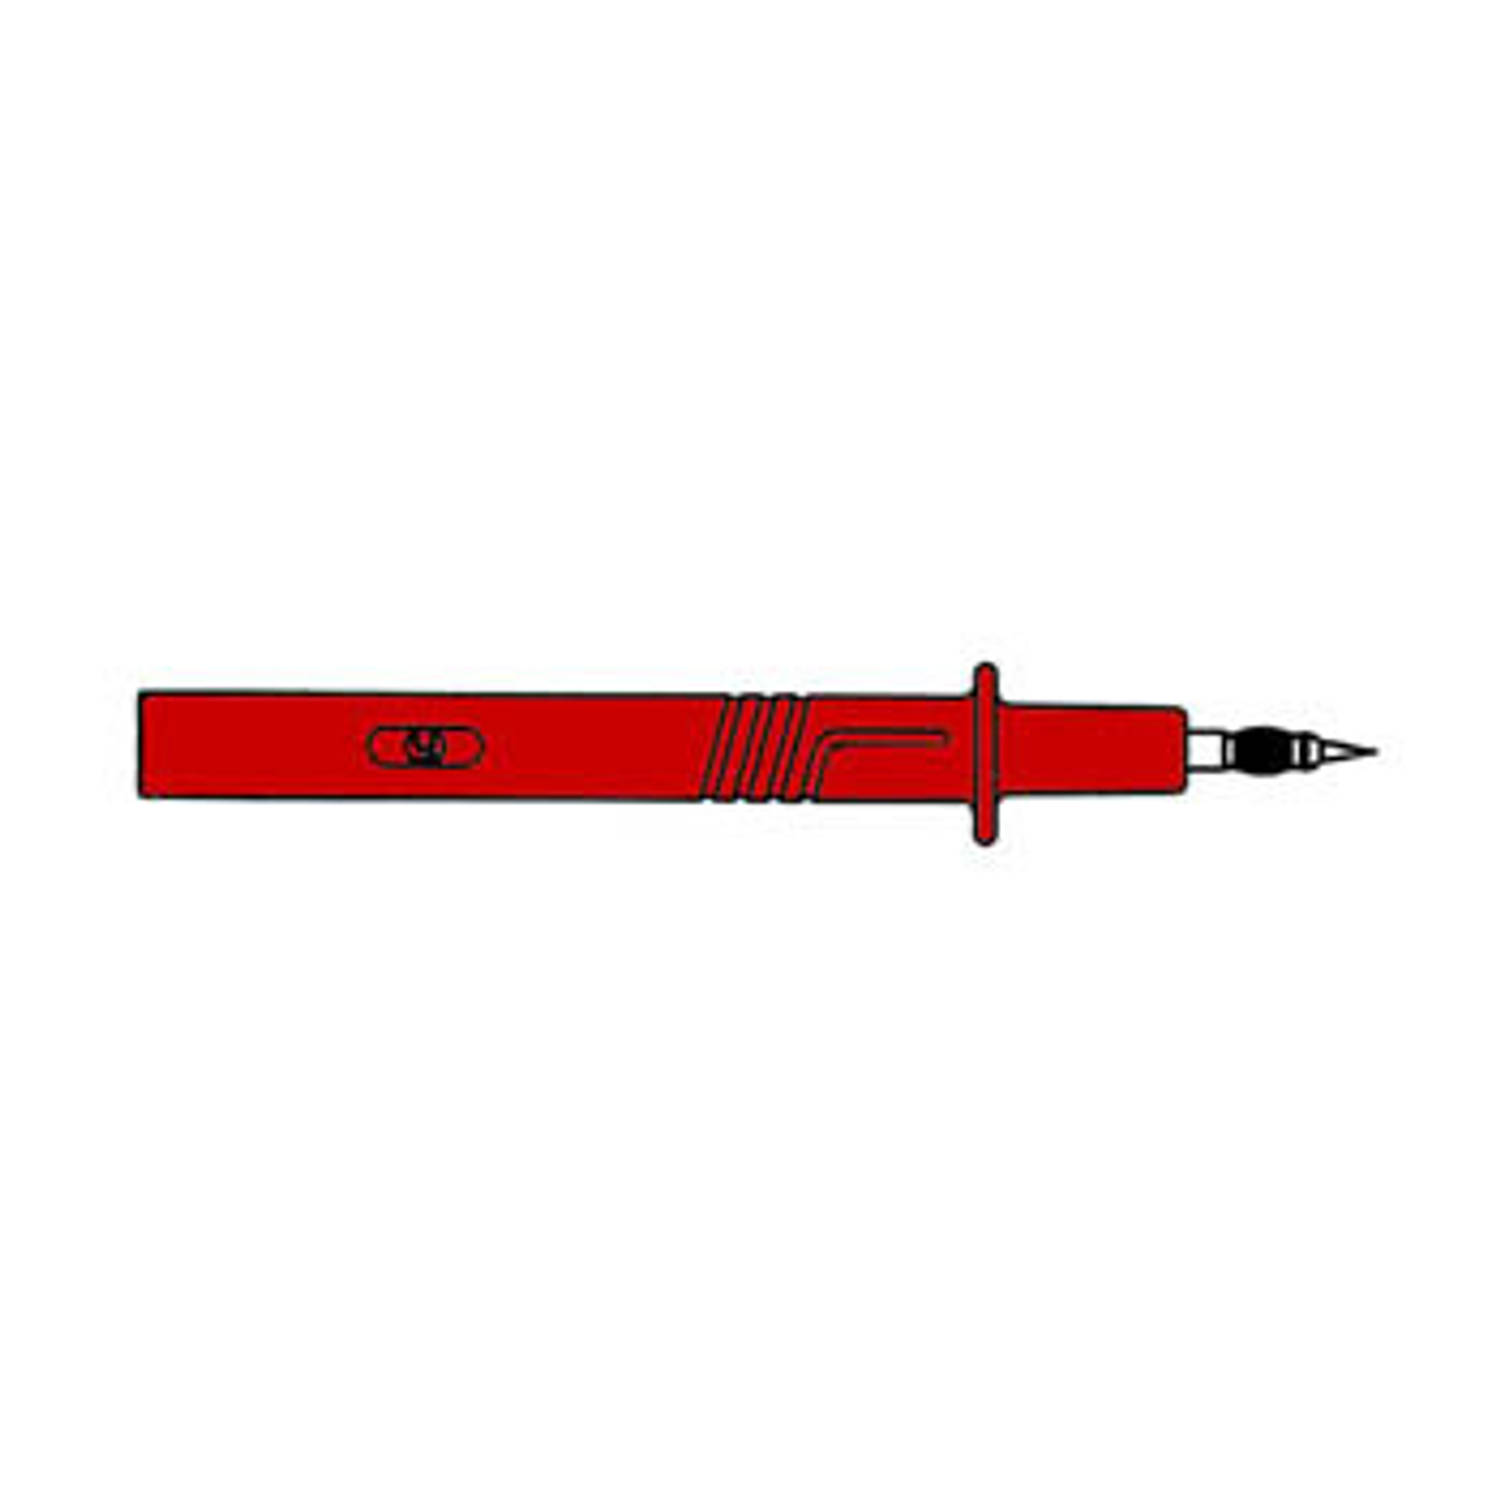 Safety Dual Function Test Probe 4mm-Red (prf 2700)